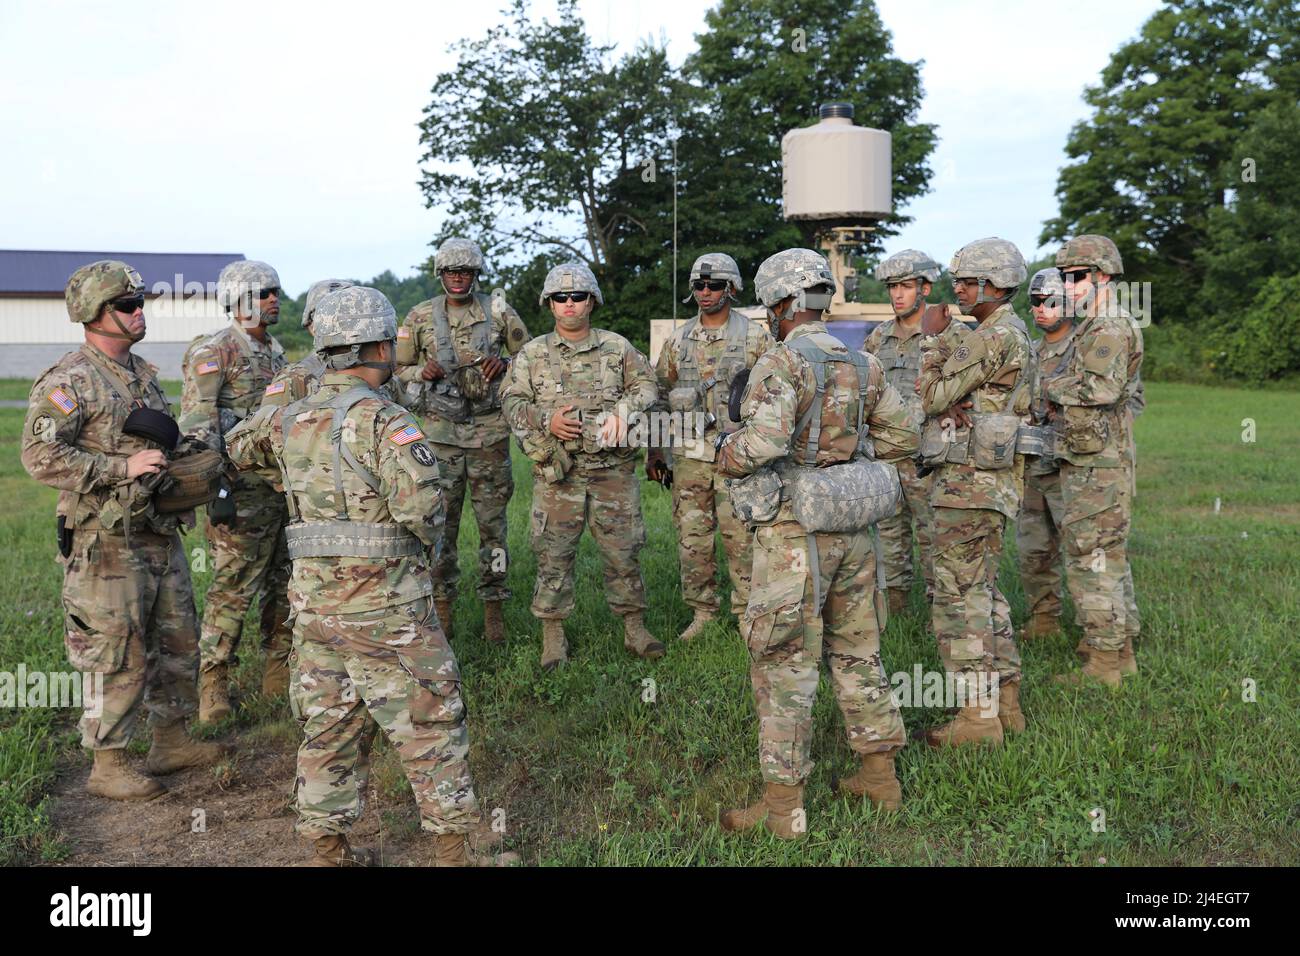 Counter Mortar Radar  - New York Army National Guard Soldiers with the 27th Infantry Brigade Combat Team review an upcoming training mission while fielding the new AN/TPQ-50 Lightweight Counter Mortar Radar (LCMR) on July 31, 2019, at Fort Drum, New York. The radar section for the 27th Infantry Brigade Combat Team took a course on the new radar system that was over a week long before testing in the field. ( U.S. Army National Guard photo by Sgt. Andrew Winchell ) Stock Photo